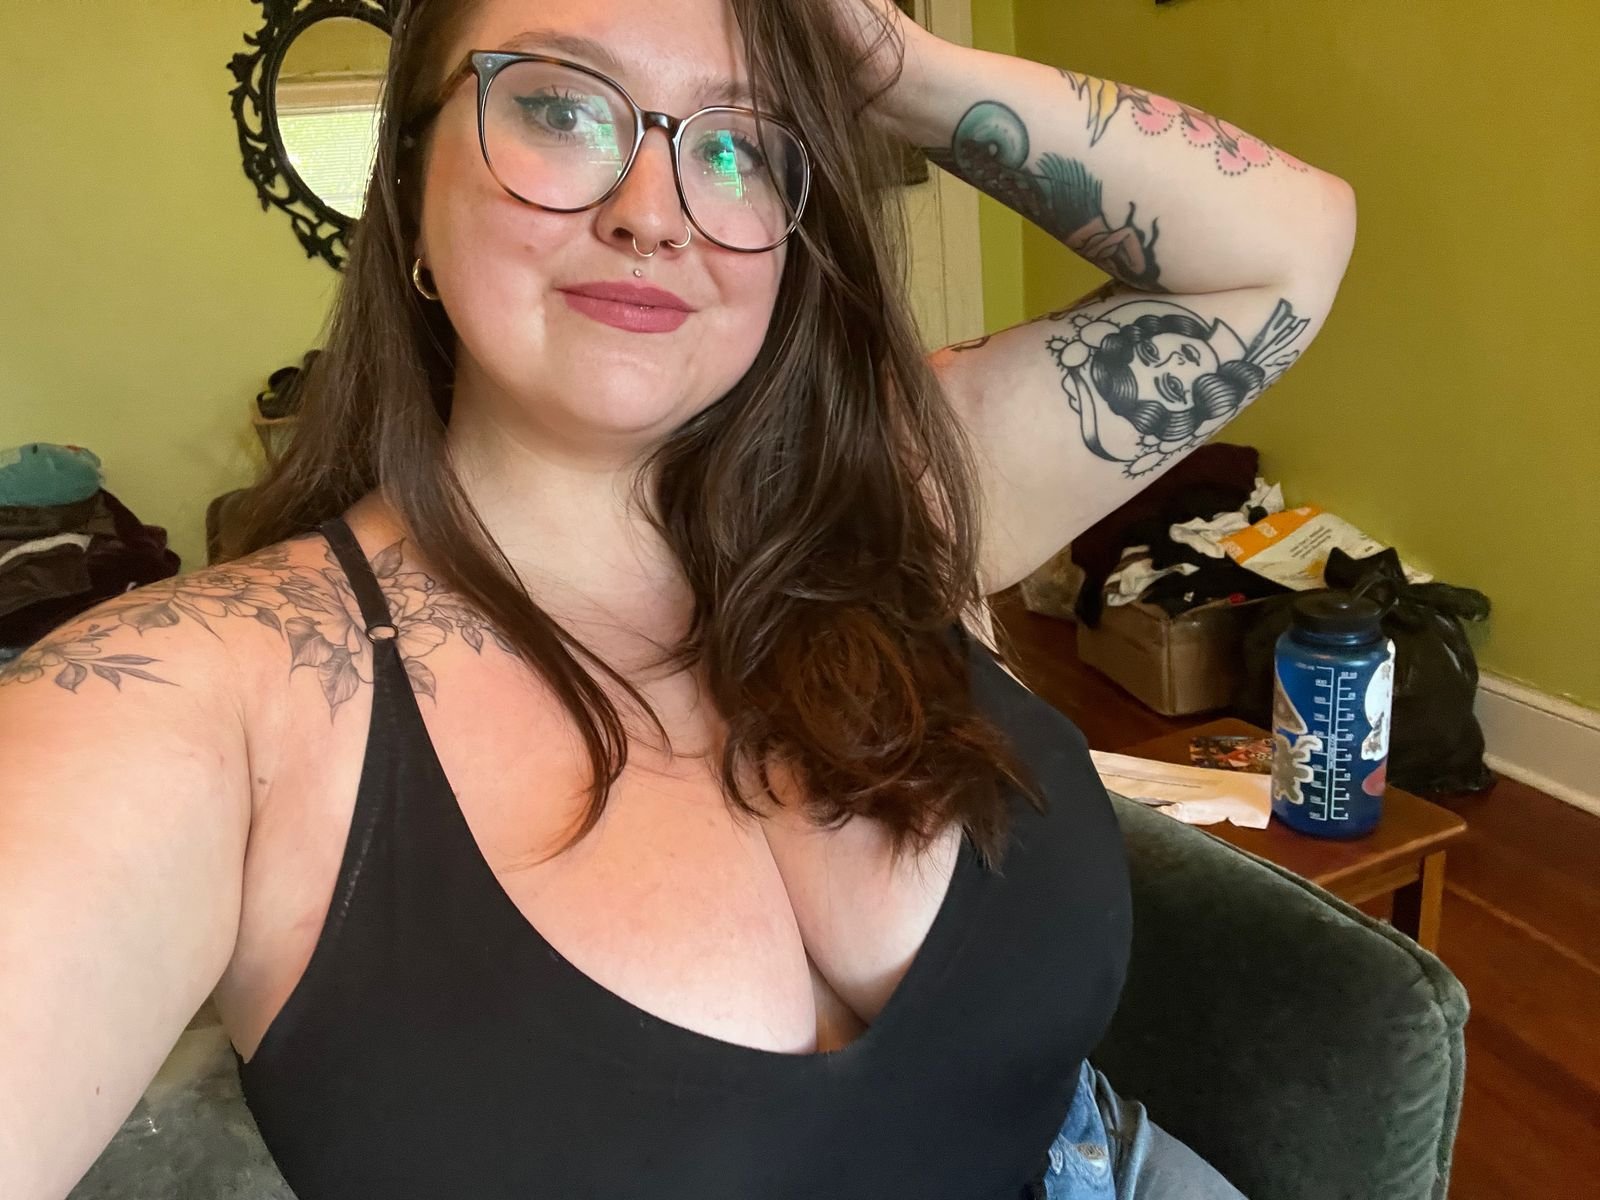 SkyPrivate live sex chat with Skye Love